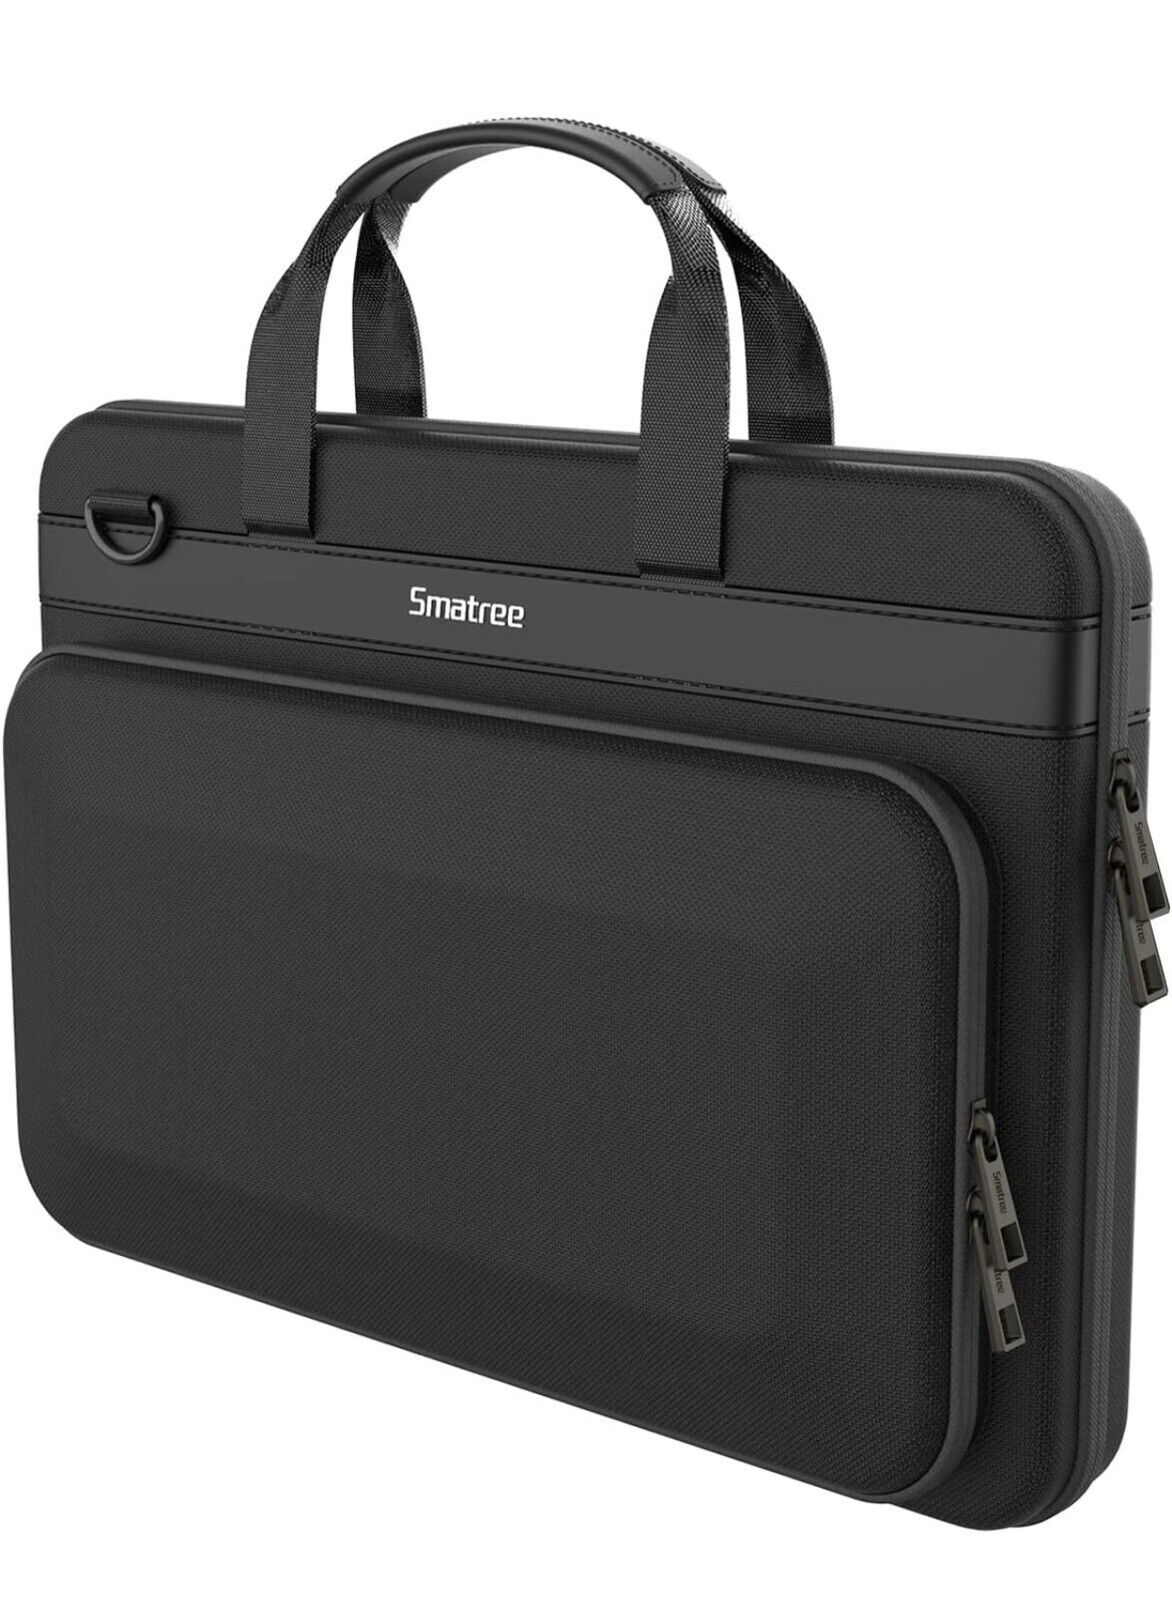 Smatree 17-18inch Hard Laptop Carrying Case for 18inch A800XL